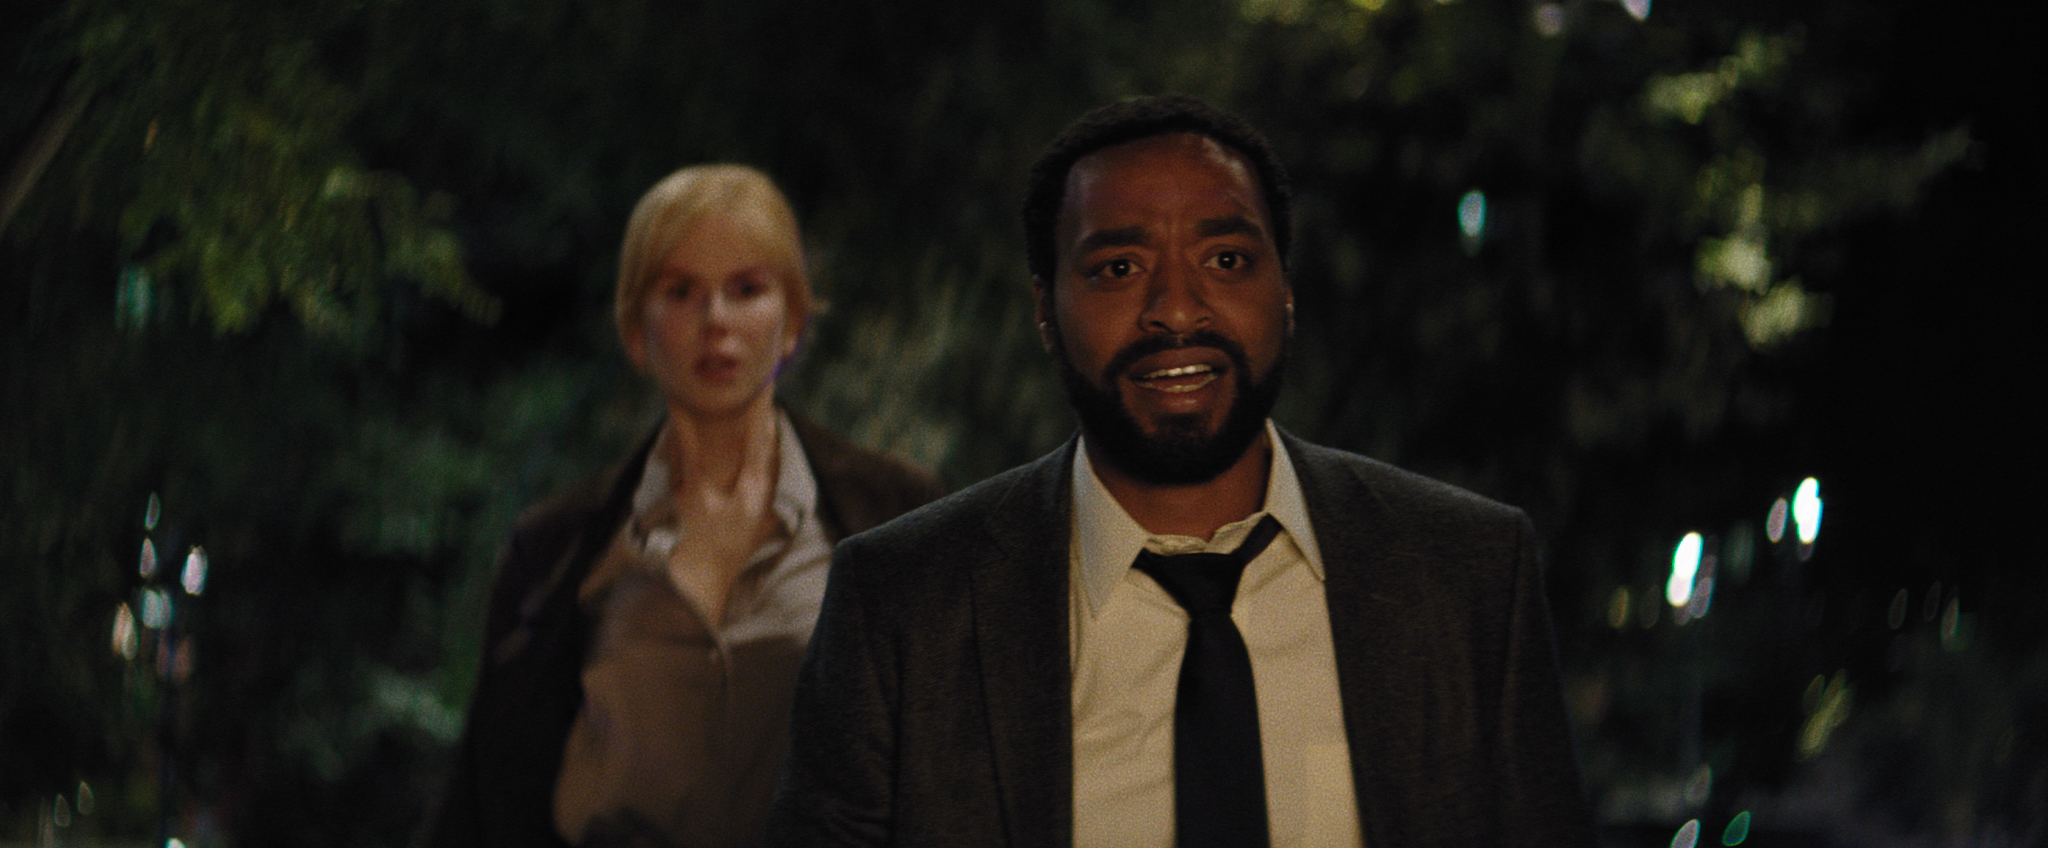 Still of Nicole Kidman and Chiwetel Ejiofor in Secret in Their Eyes (2015)